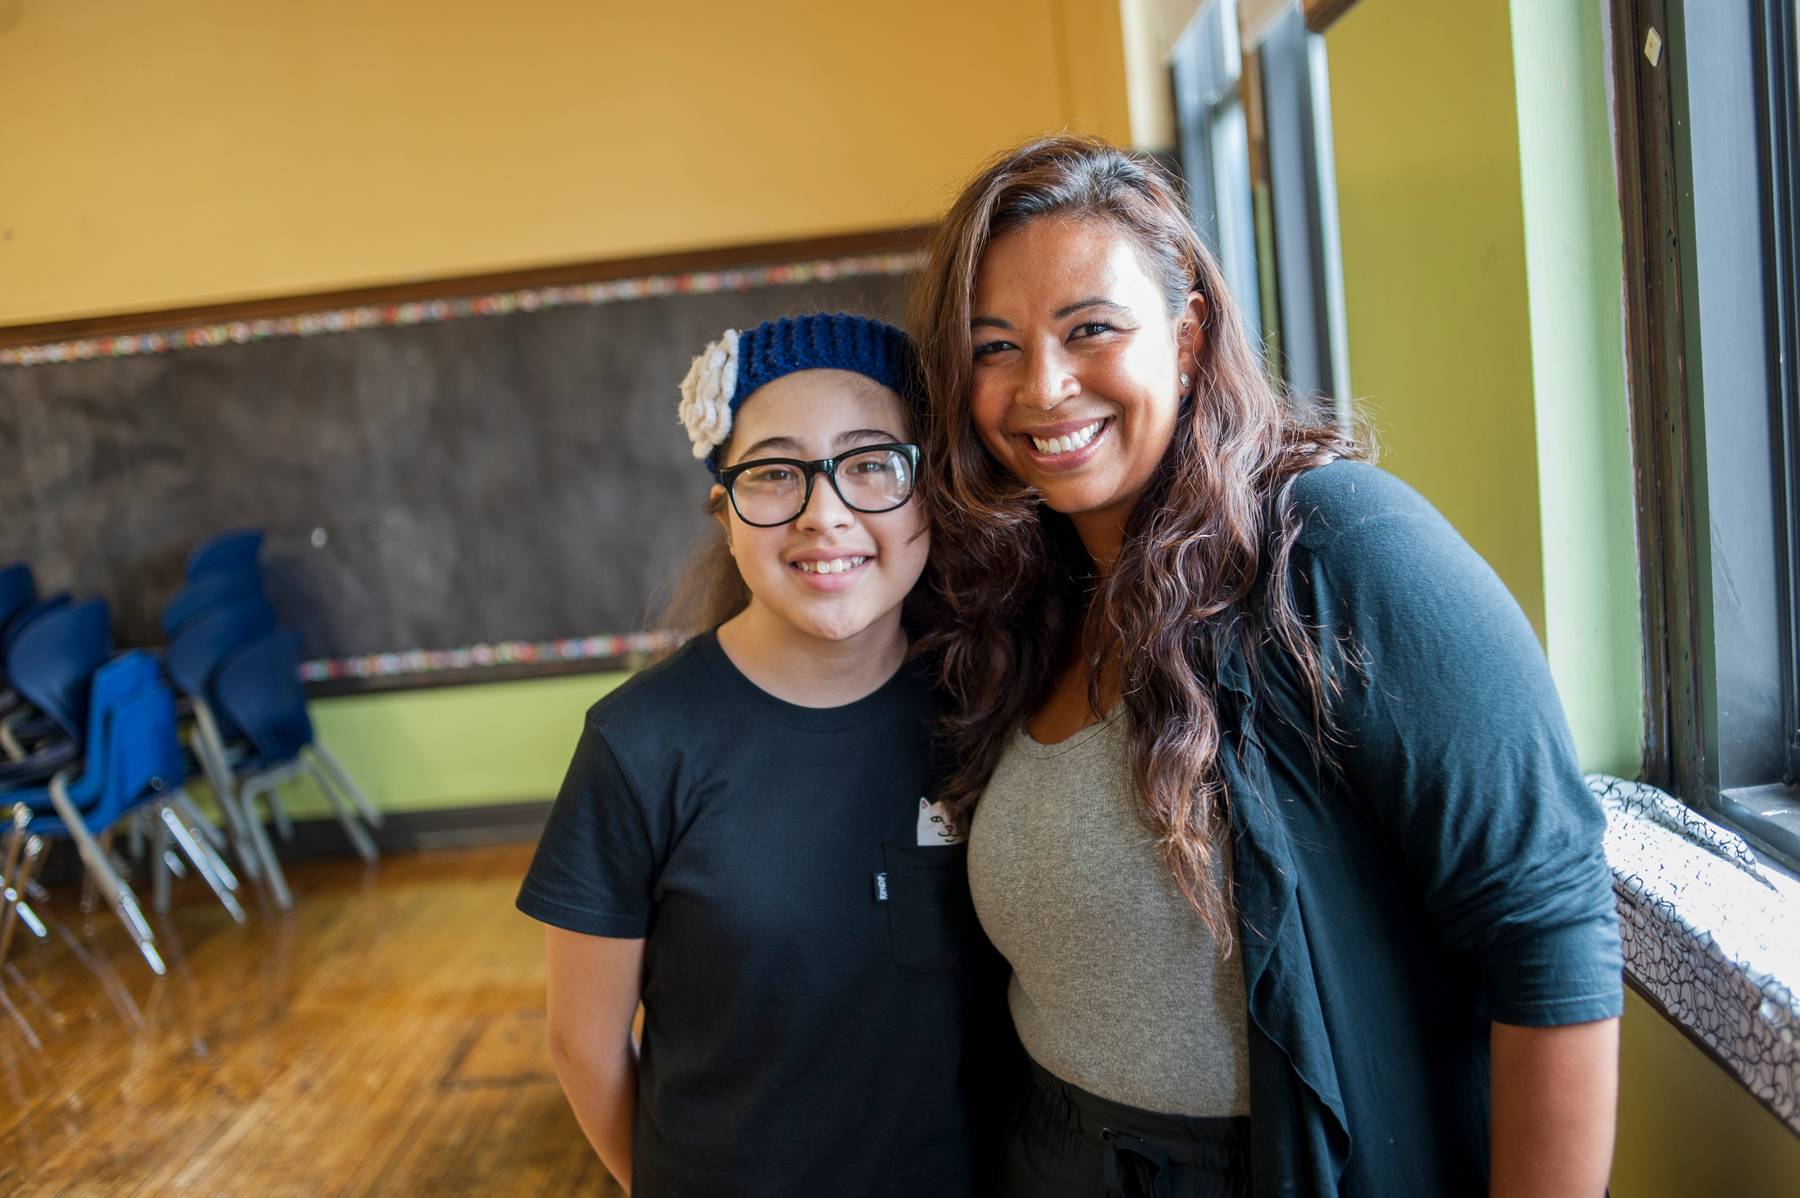 Elvalisa Guzman and her student smiling, looking directly at the camera